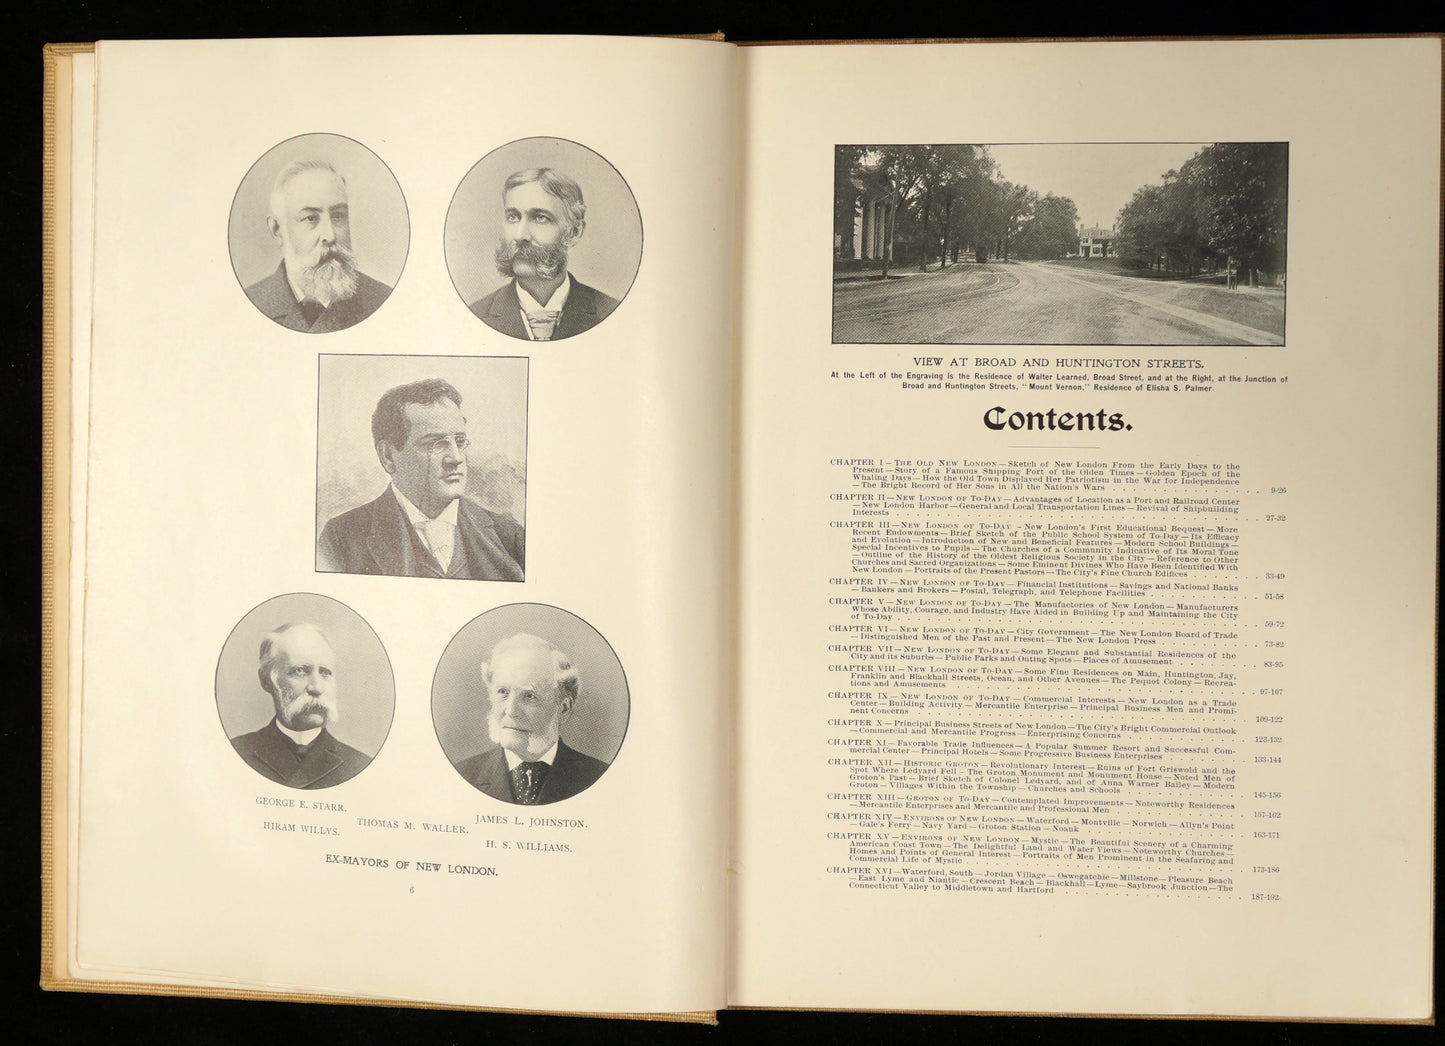 Picturesque New London (at the Commencement of the 20th C), 1901 - 1st Edition - Bear and Raven Antiques